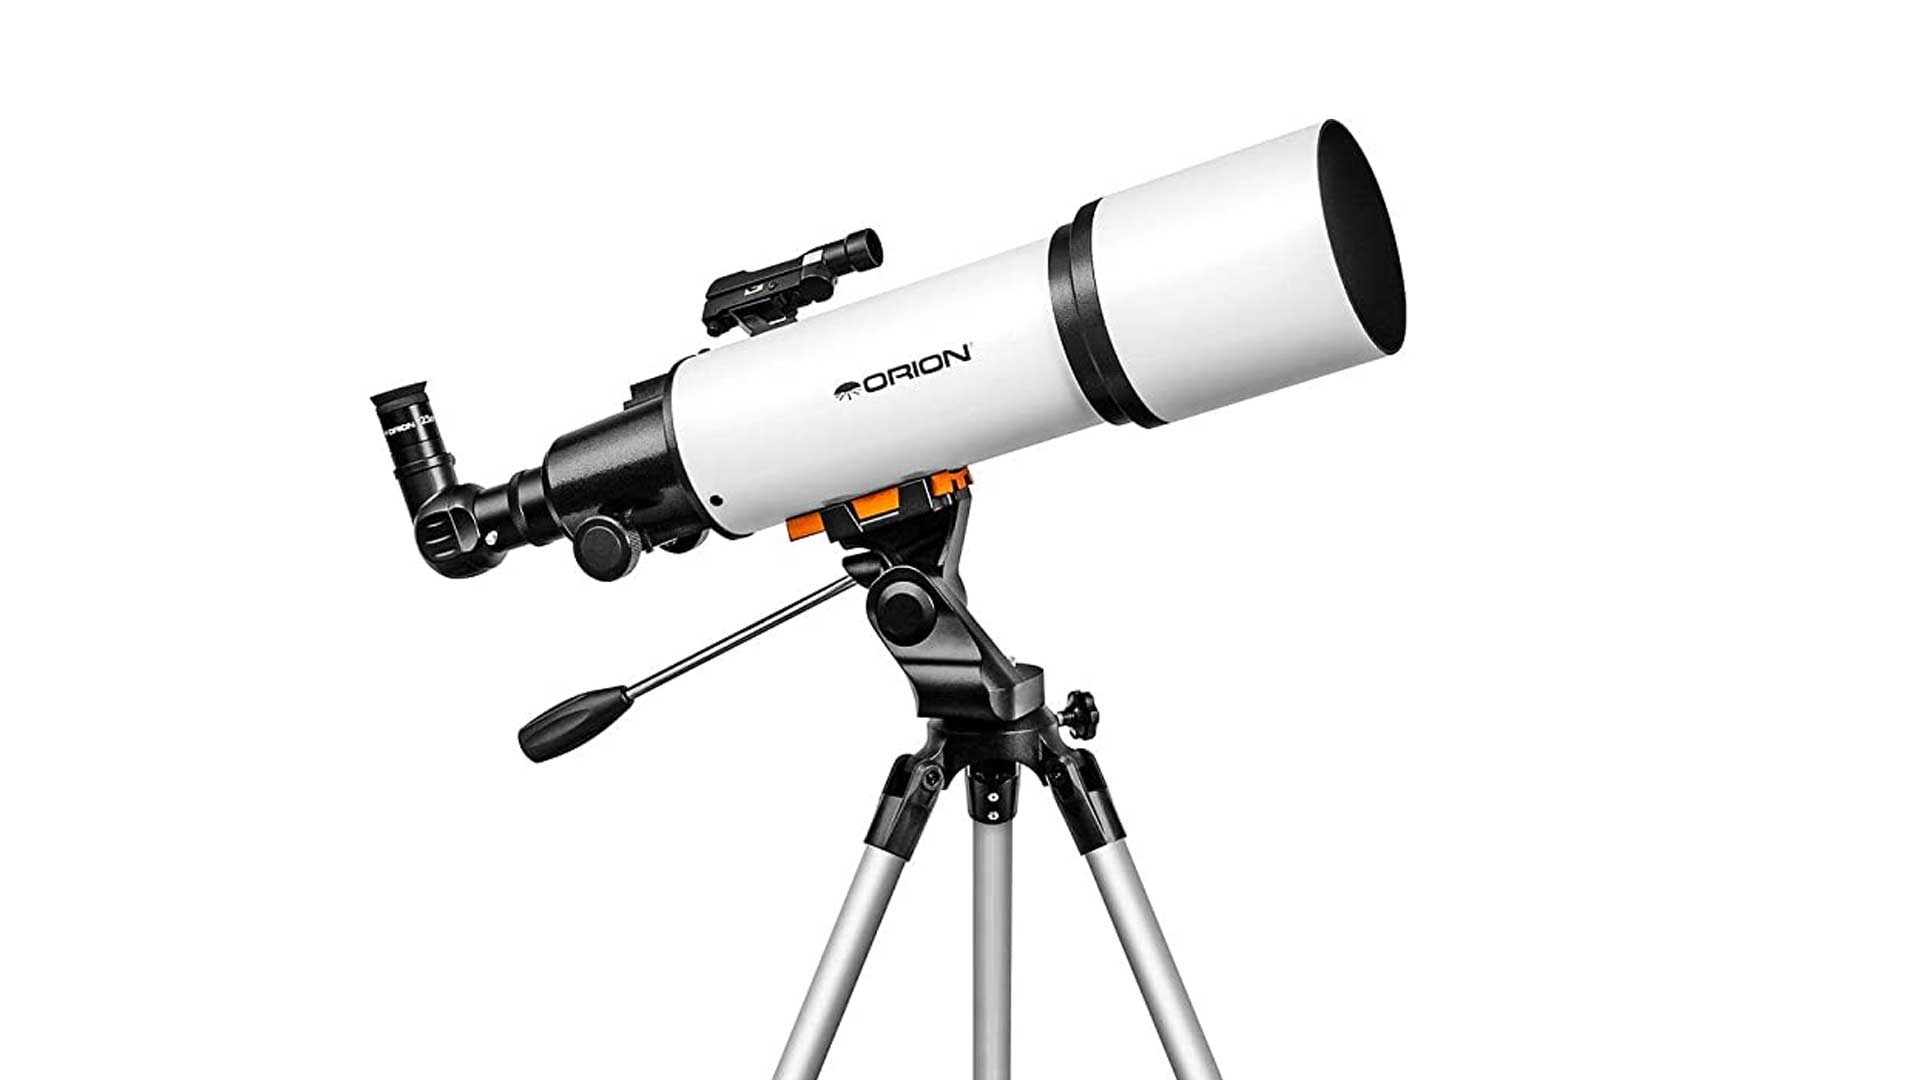 Orion telescope product image